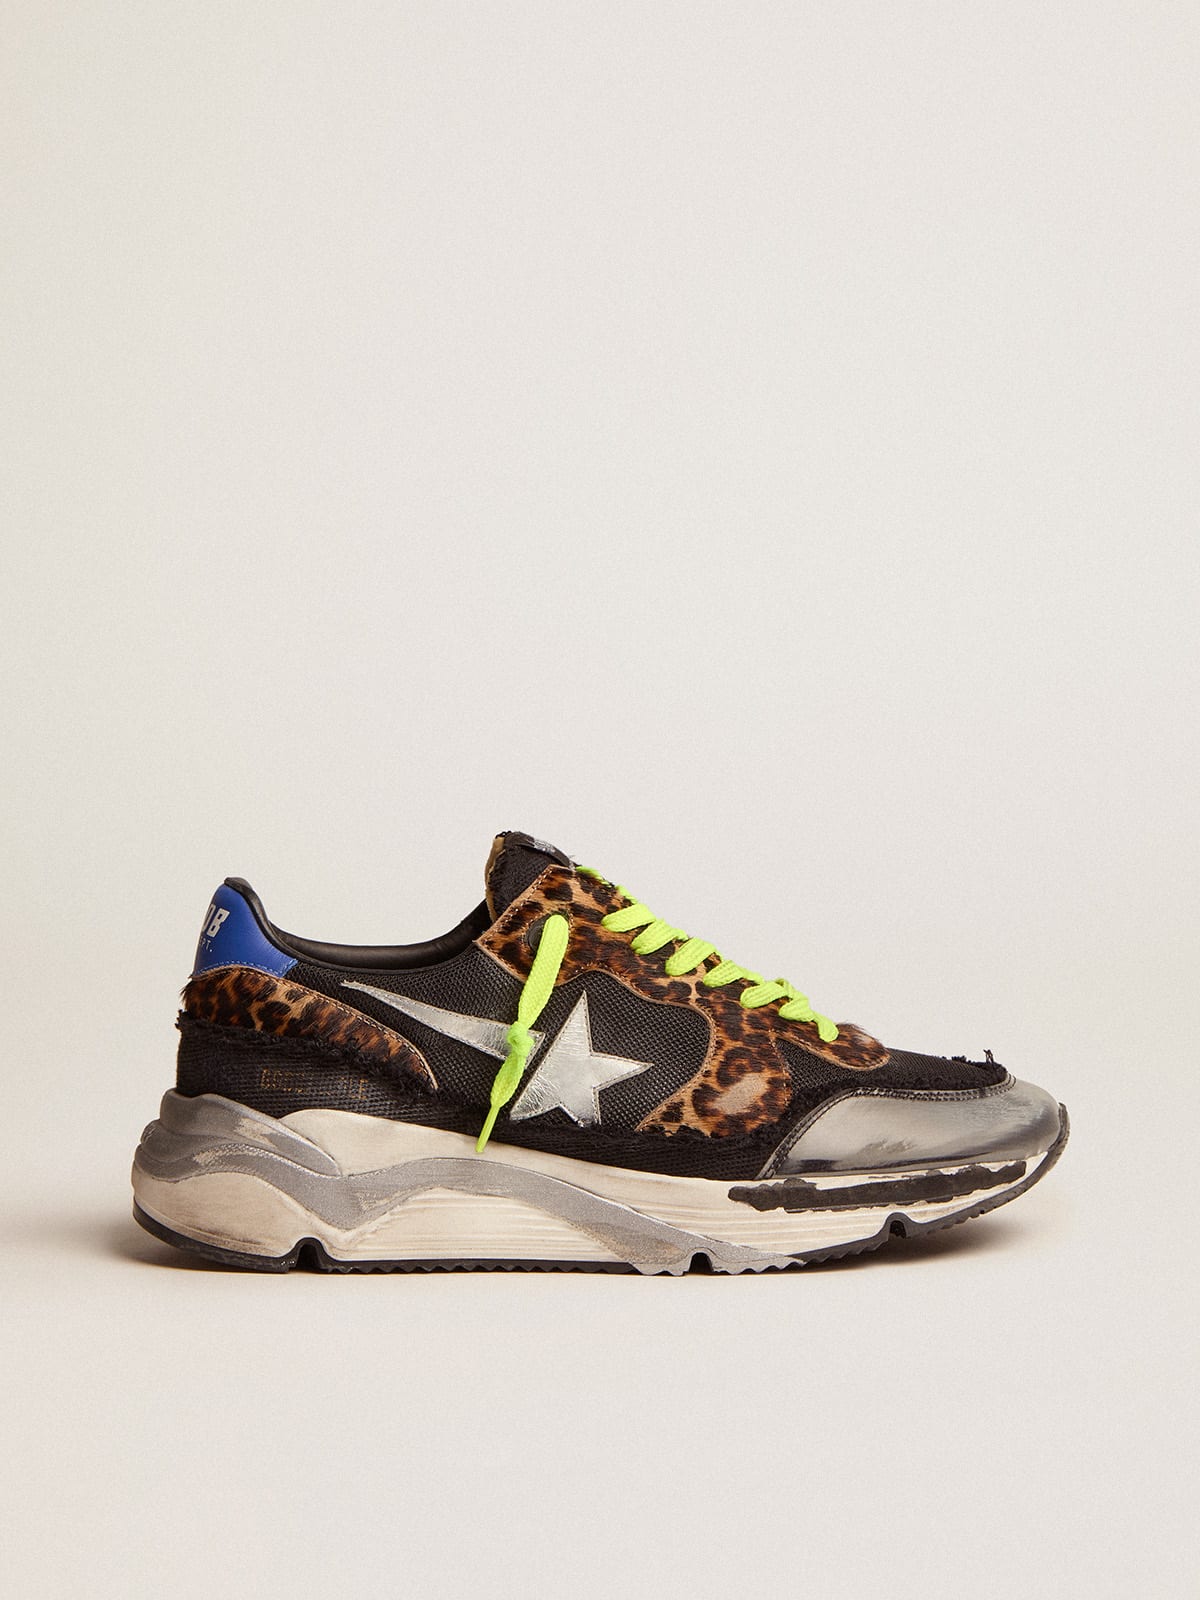 Golden Goose - Running Sole LTD sneakers in black mesh with leopard-print pony skin inserts and silver laminated leather star in 